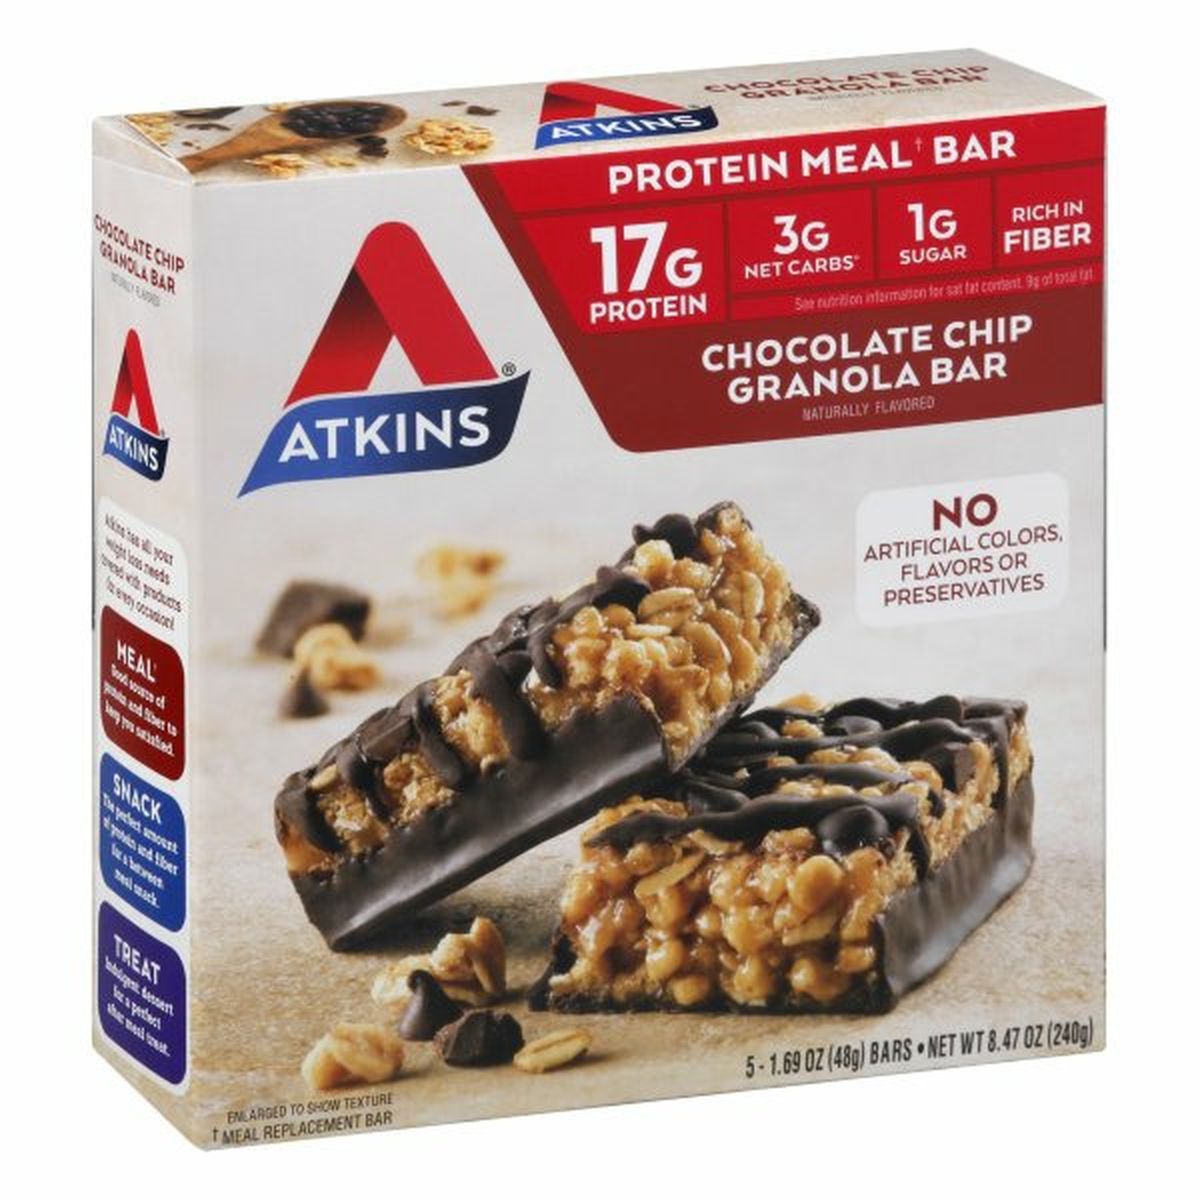 Calories in Atkins Protein Meal Bar, Chocolate Chip Granola